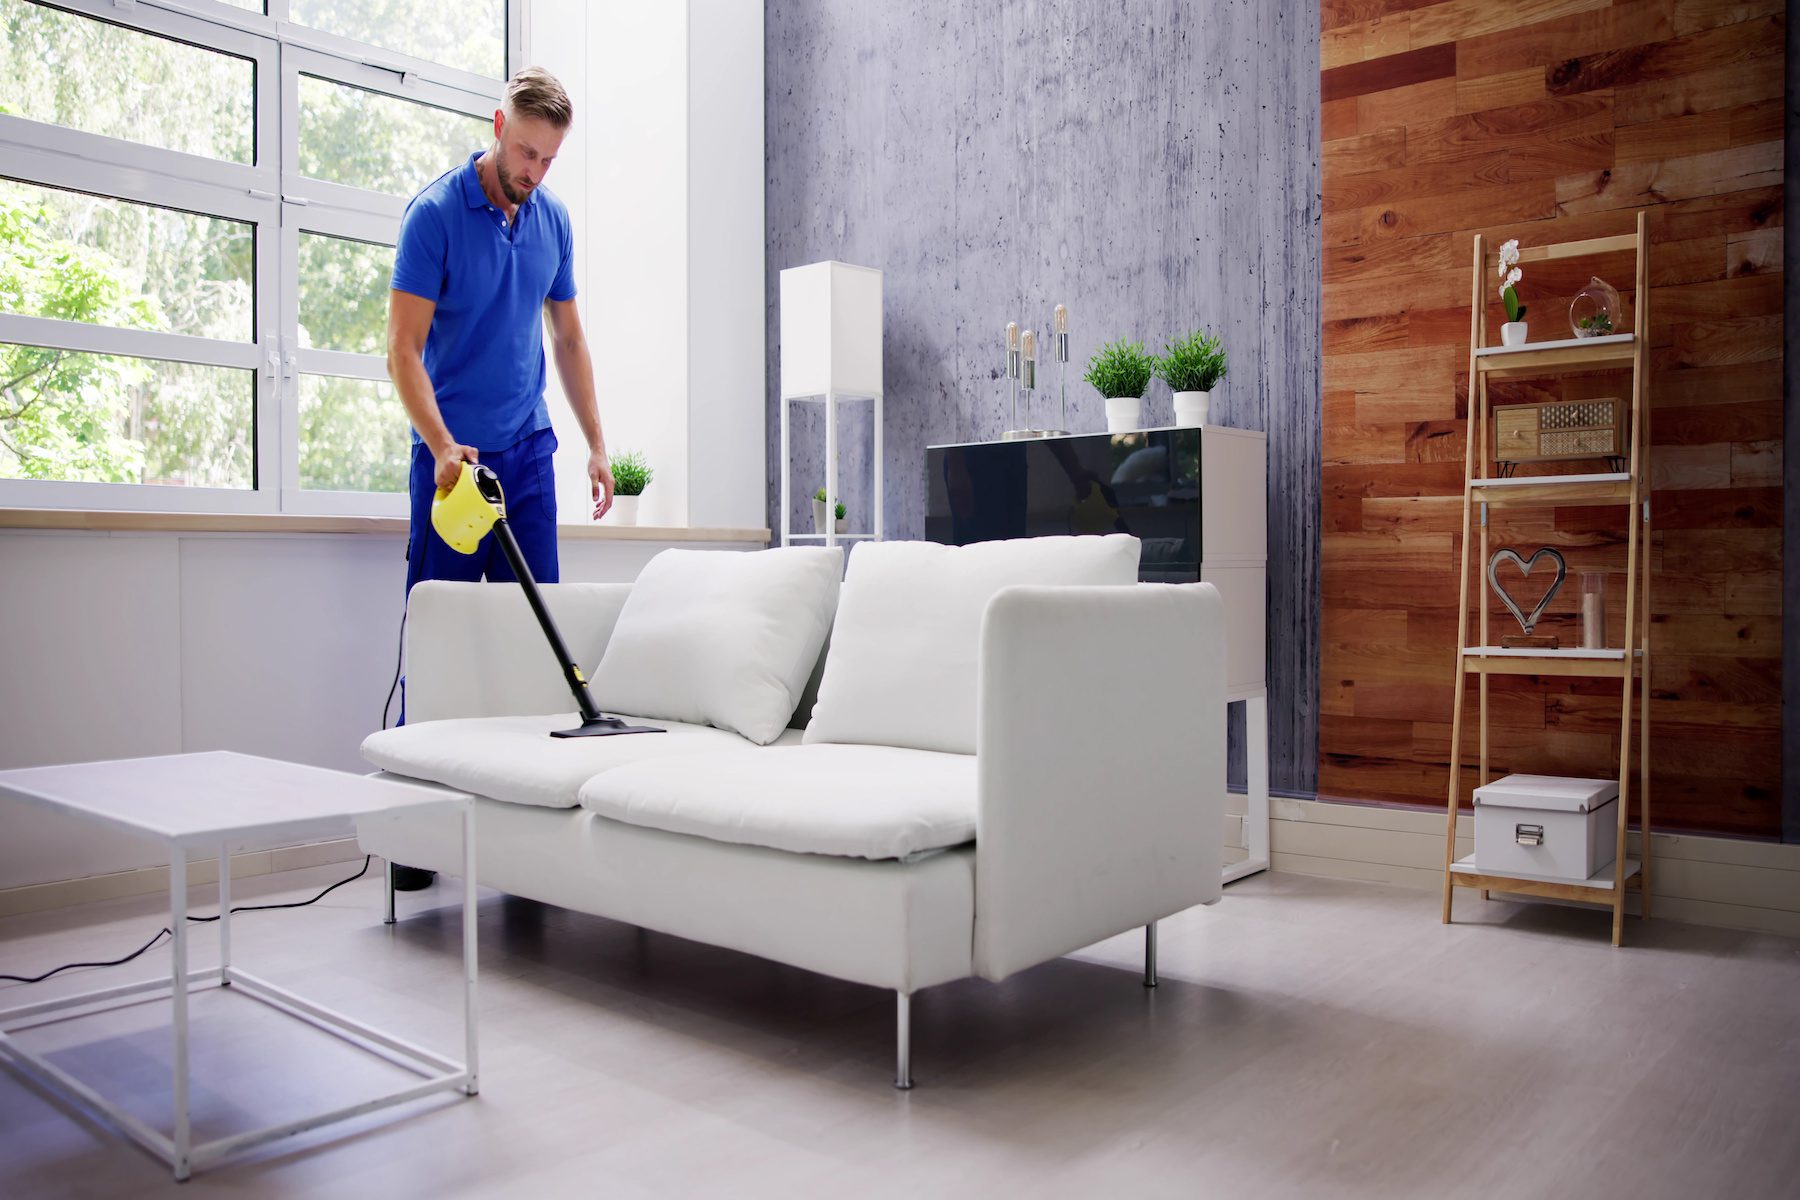 Sofa Steam Cleaner Service. Professional Worker Cleanup